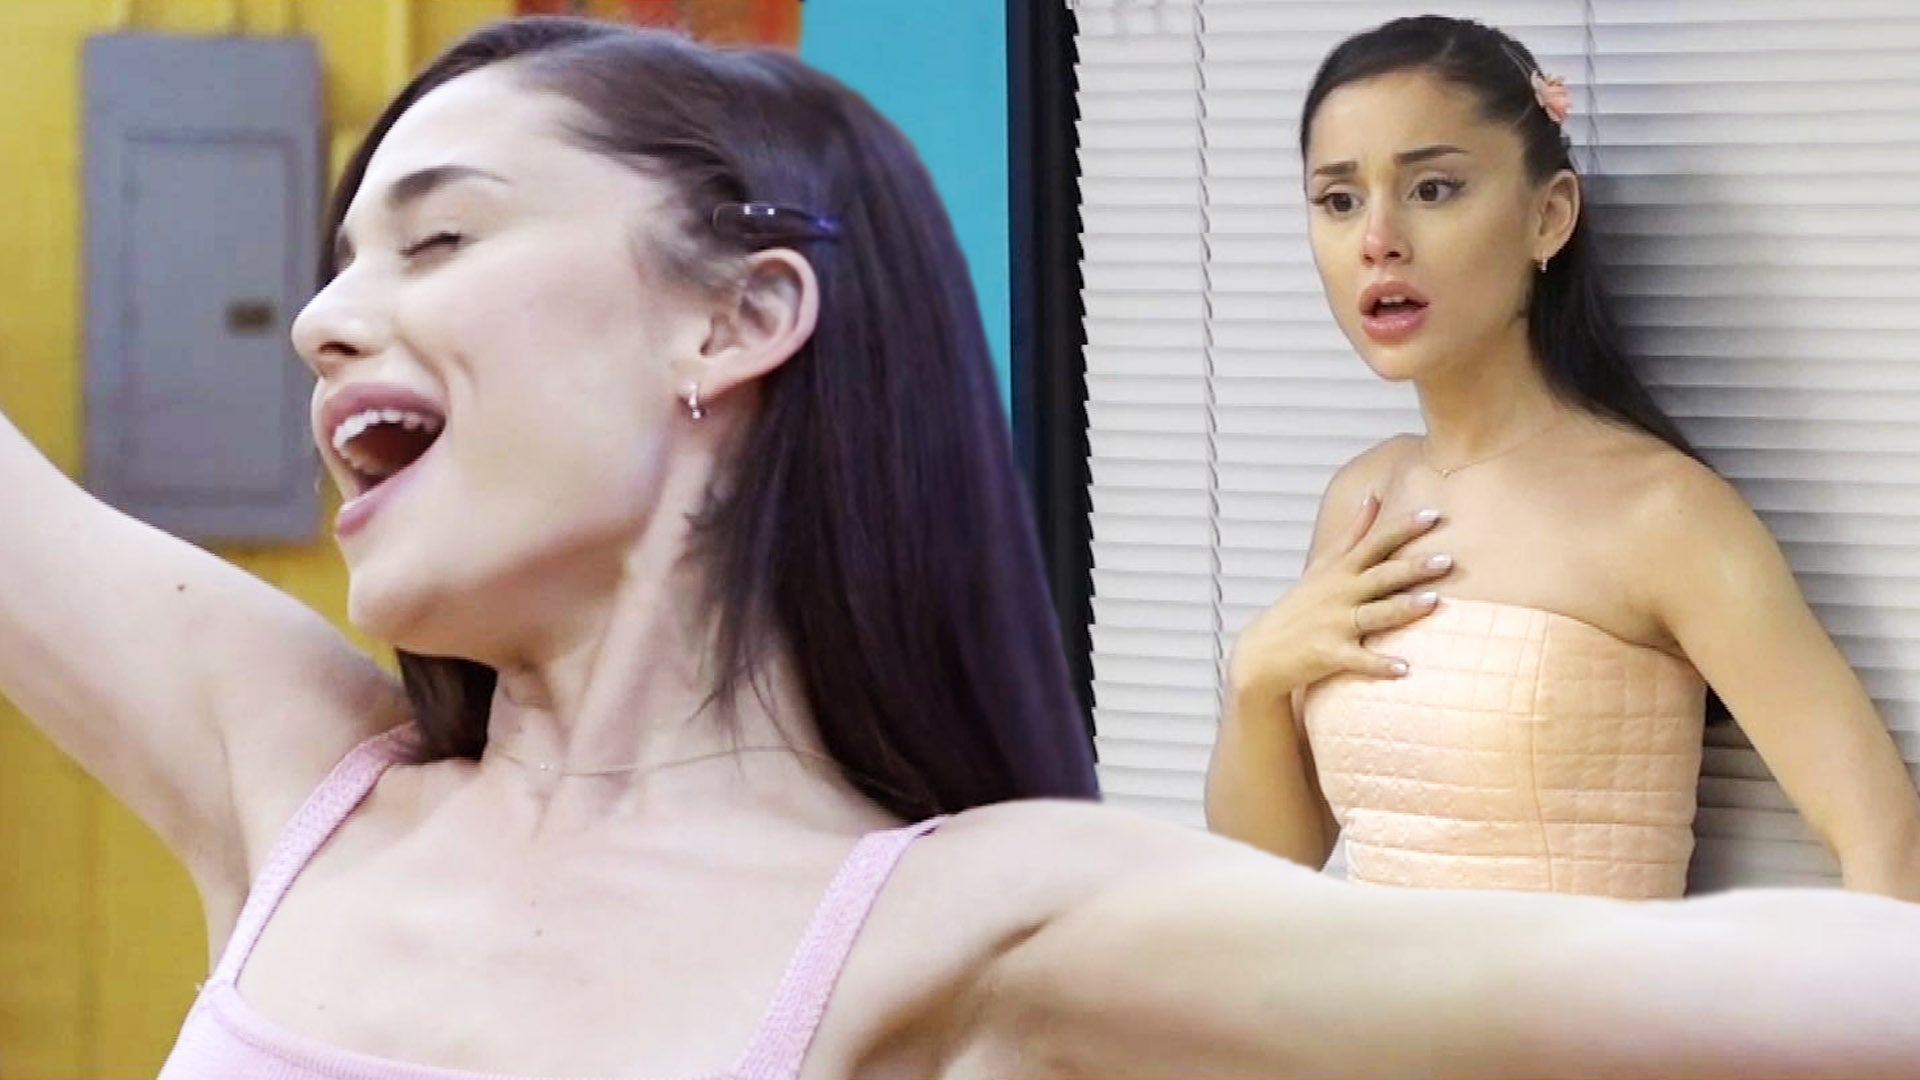 'Wicked': Ariana Grande's Audition Tape and New Scenes Revealed!